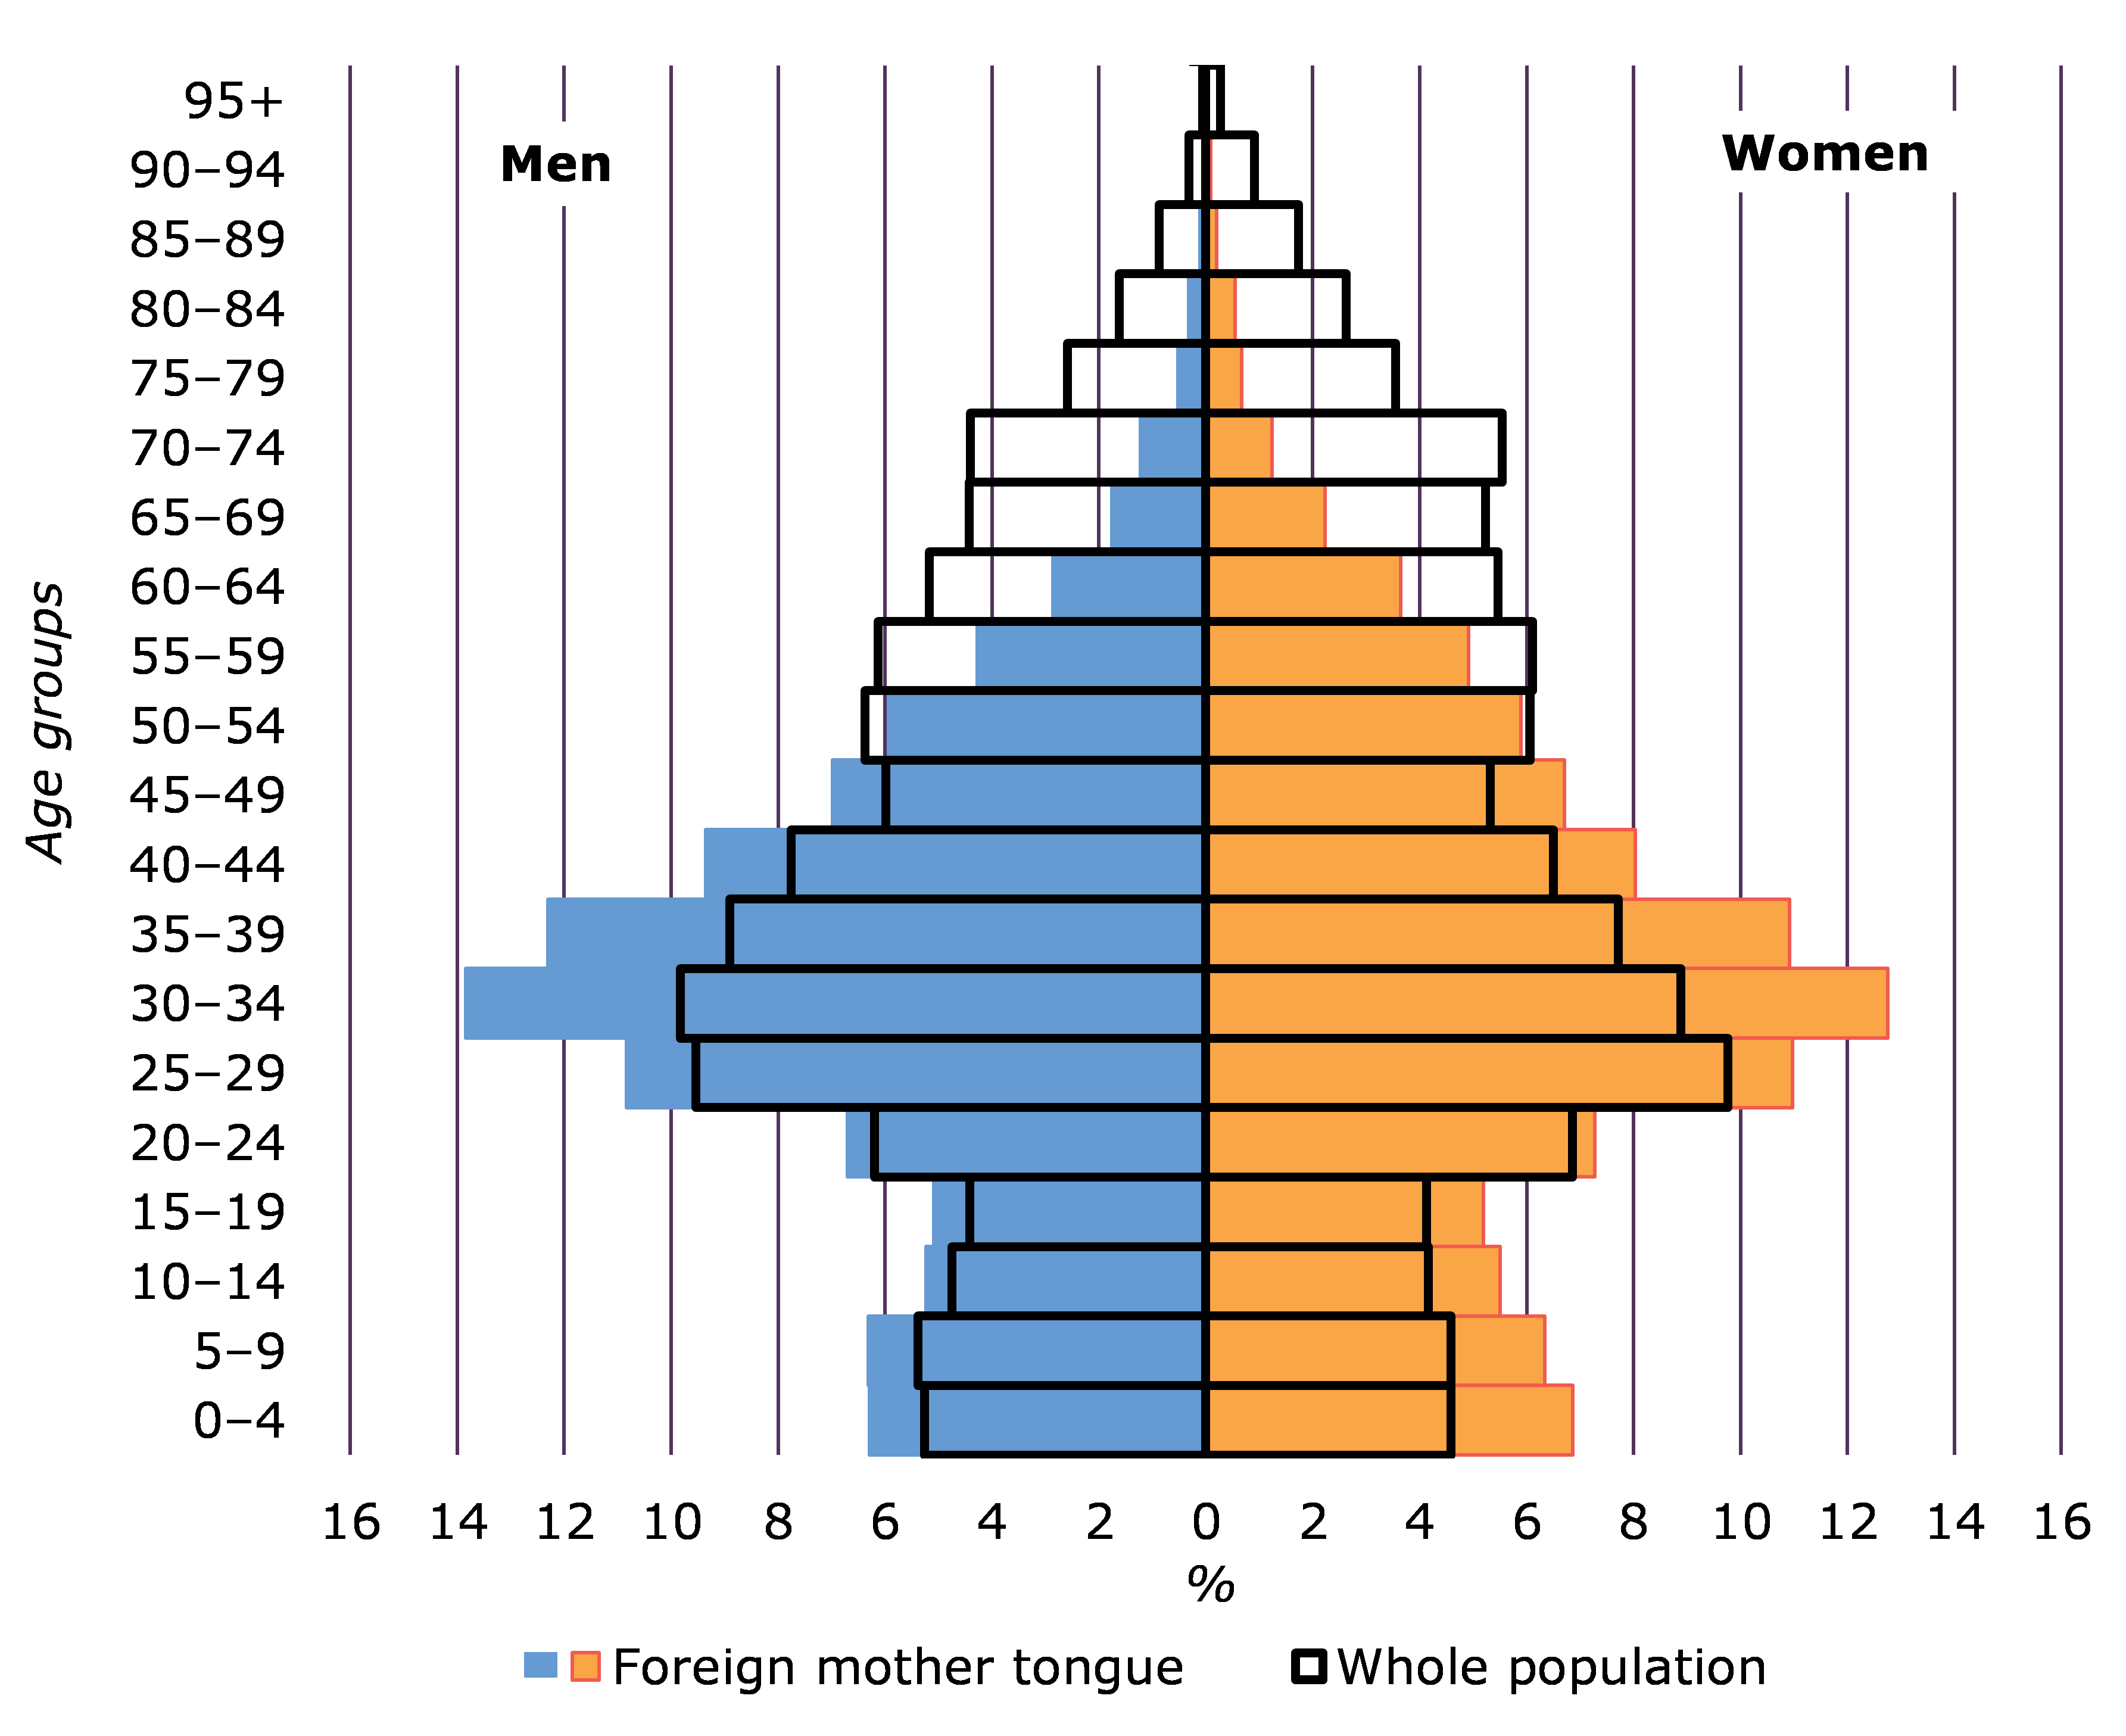 Age structure of the whole population and those with a foreign mother tongue in Helsinki on 31 Dec. 2019